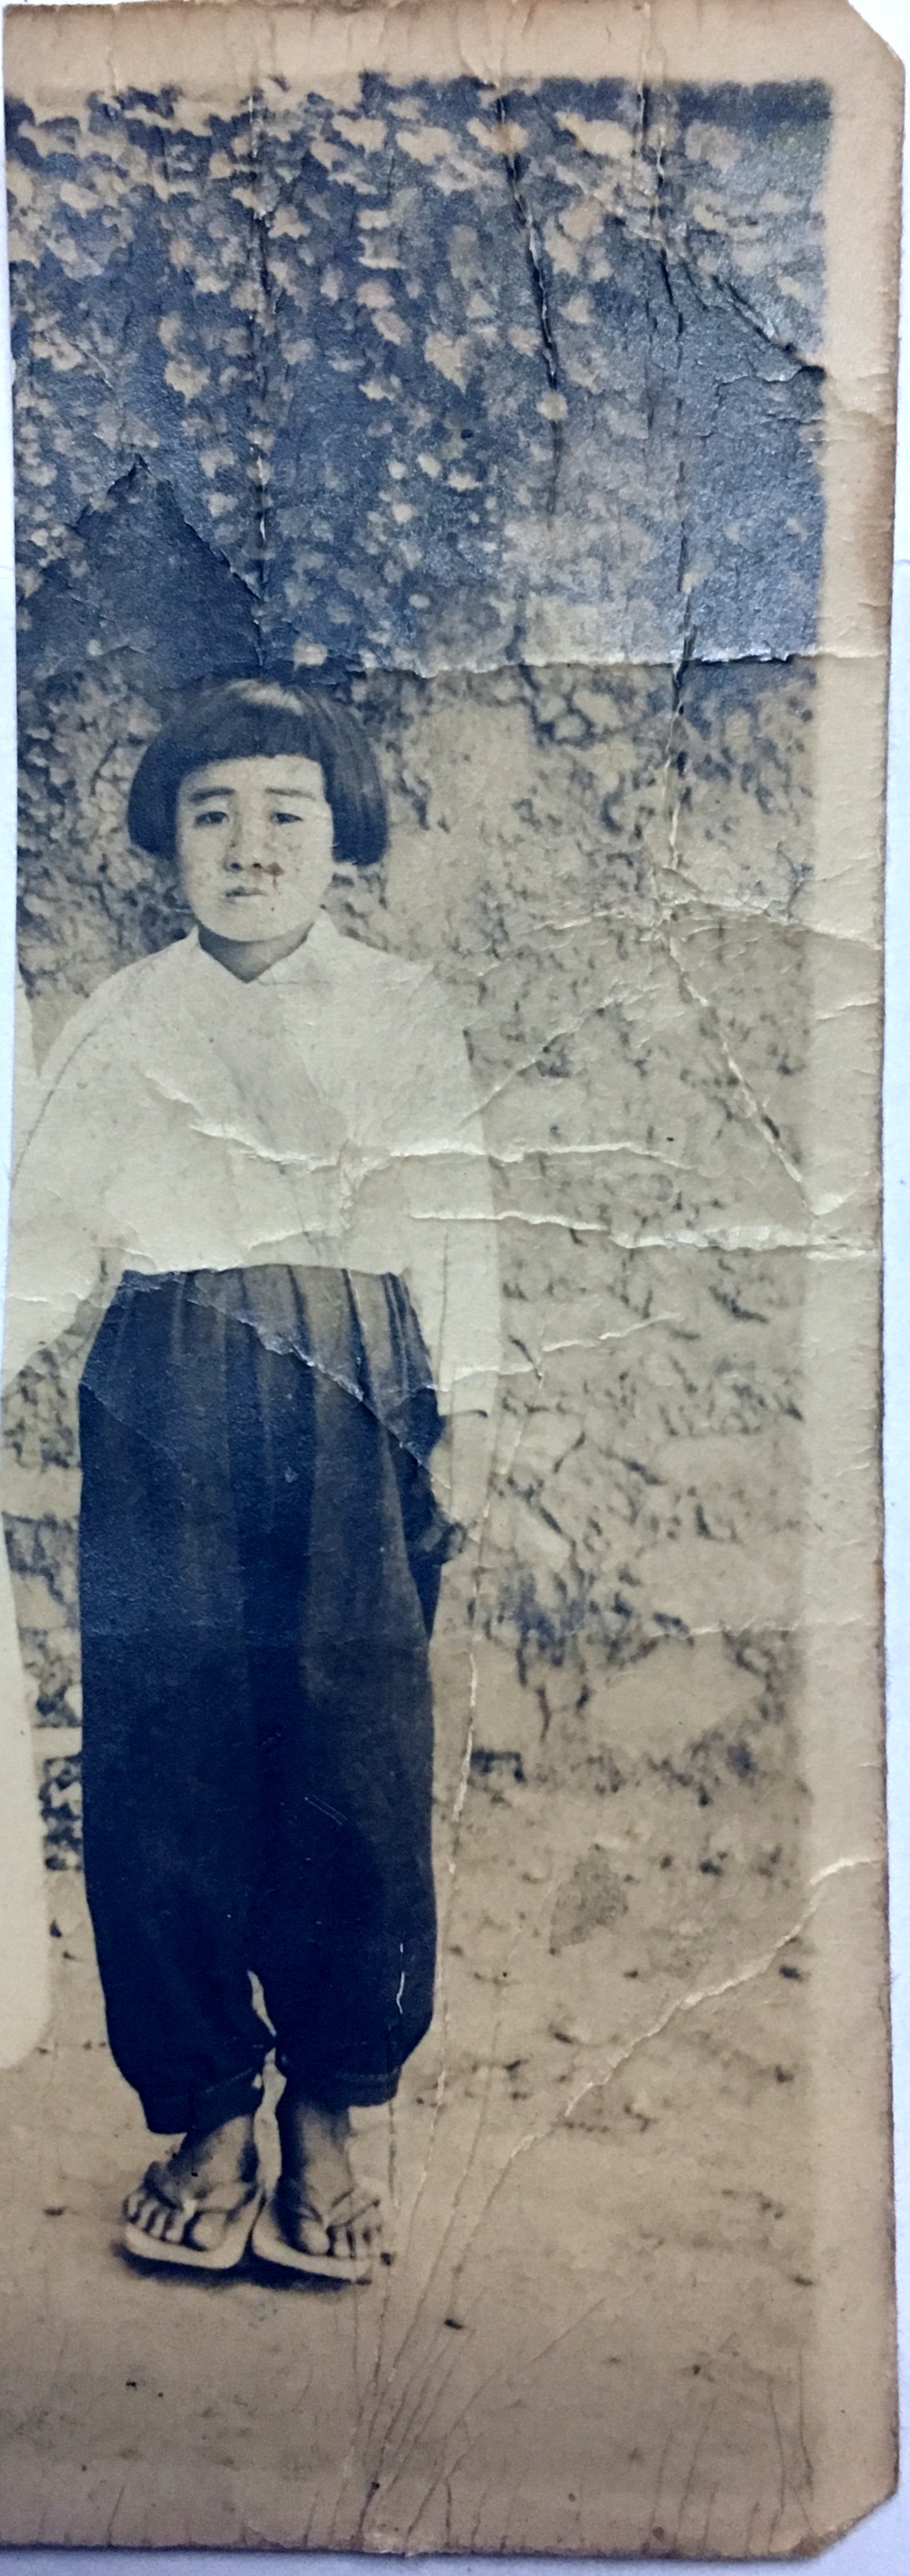 My mother 
8years old
In 1941